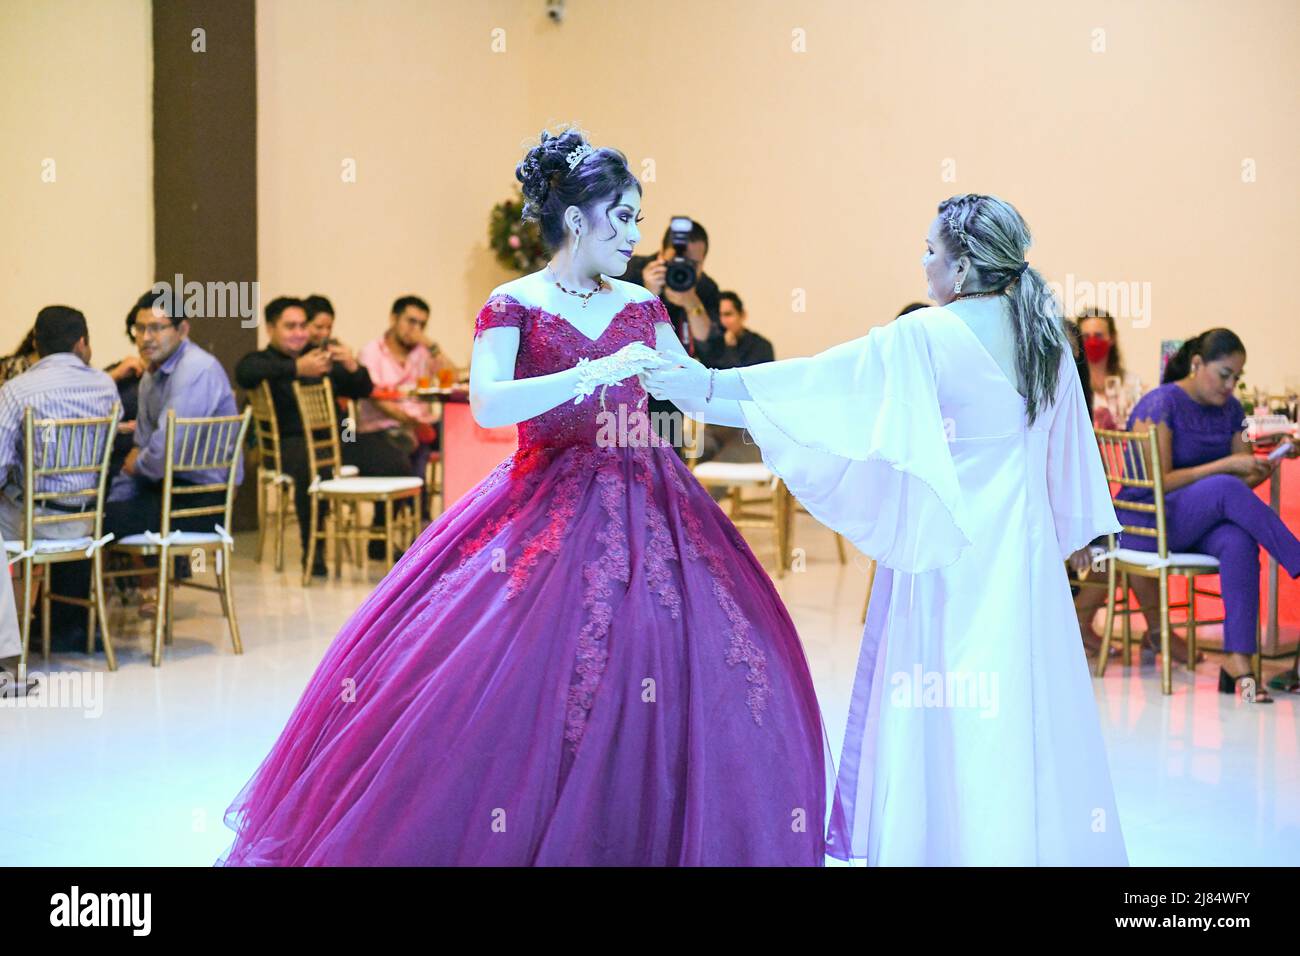 Mexican mother and daughter dance during the celebration of the daughter's Quinceañera (15th birthday) for girls. This special occasion is celebrated by girls throughout Latin America / Campeche, Mexico Stock Photo